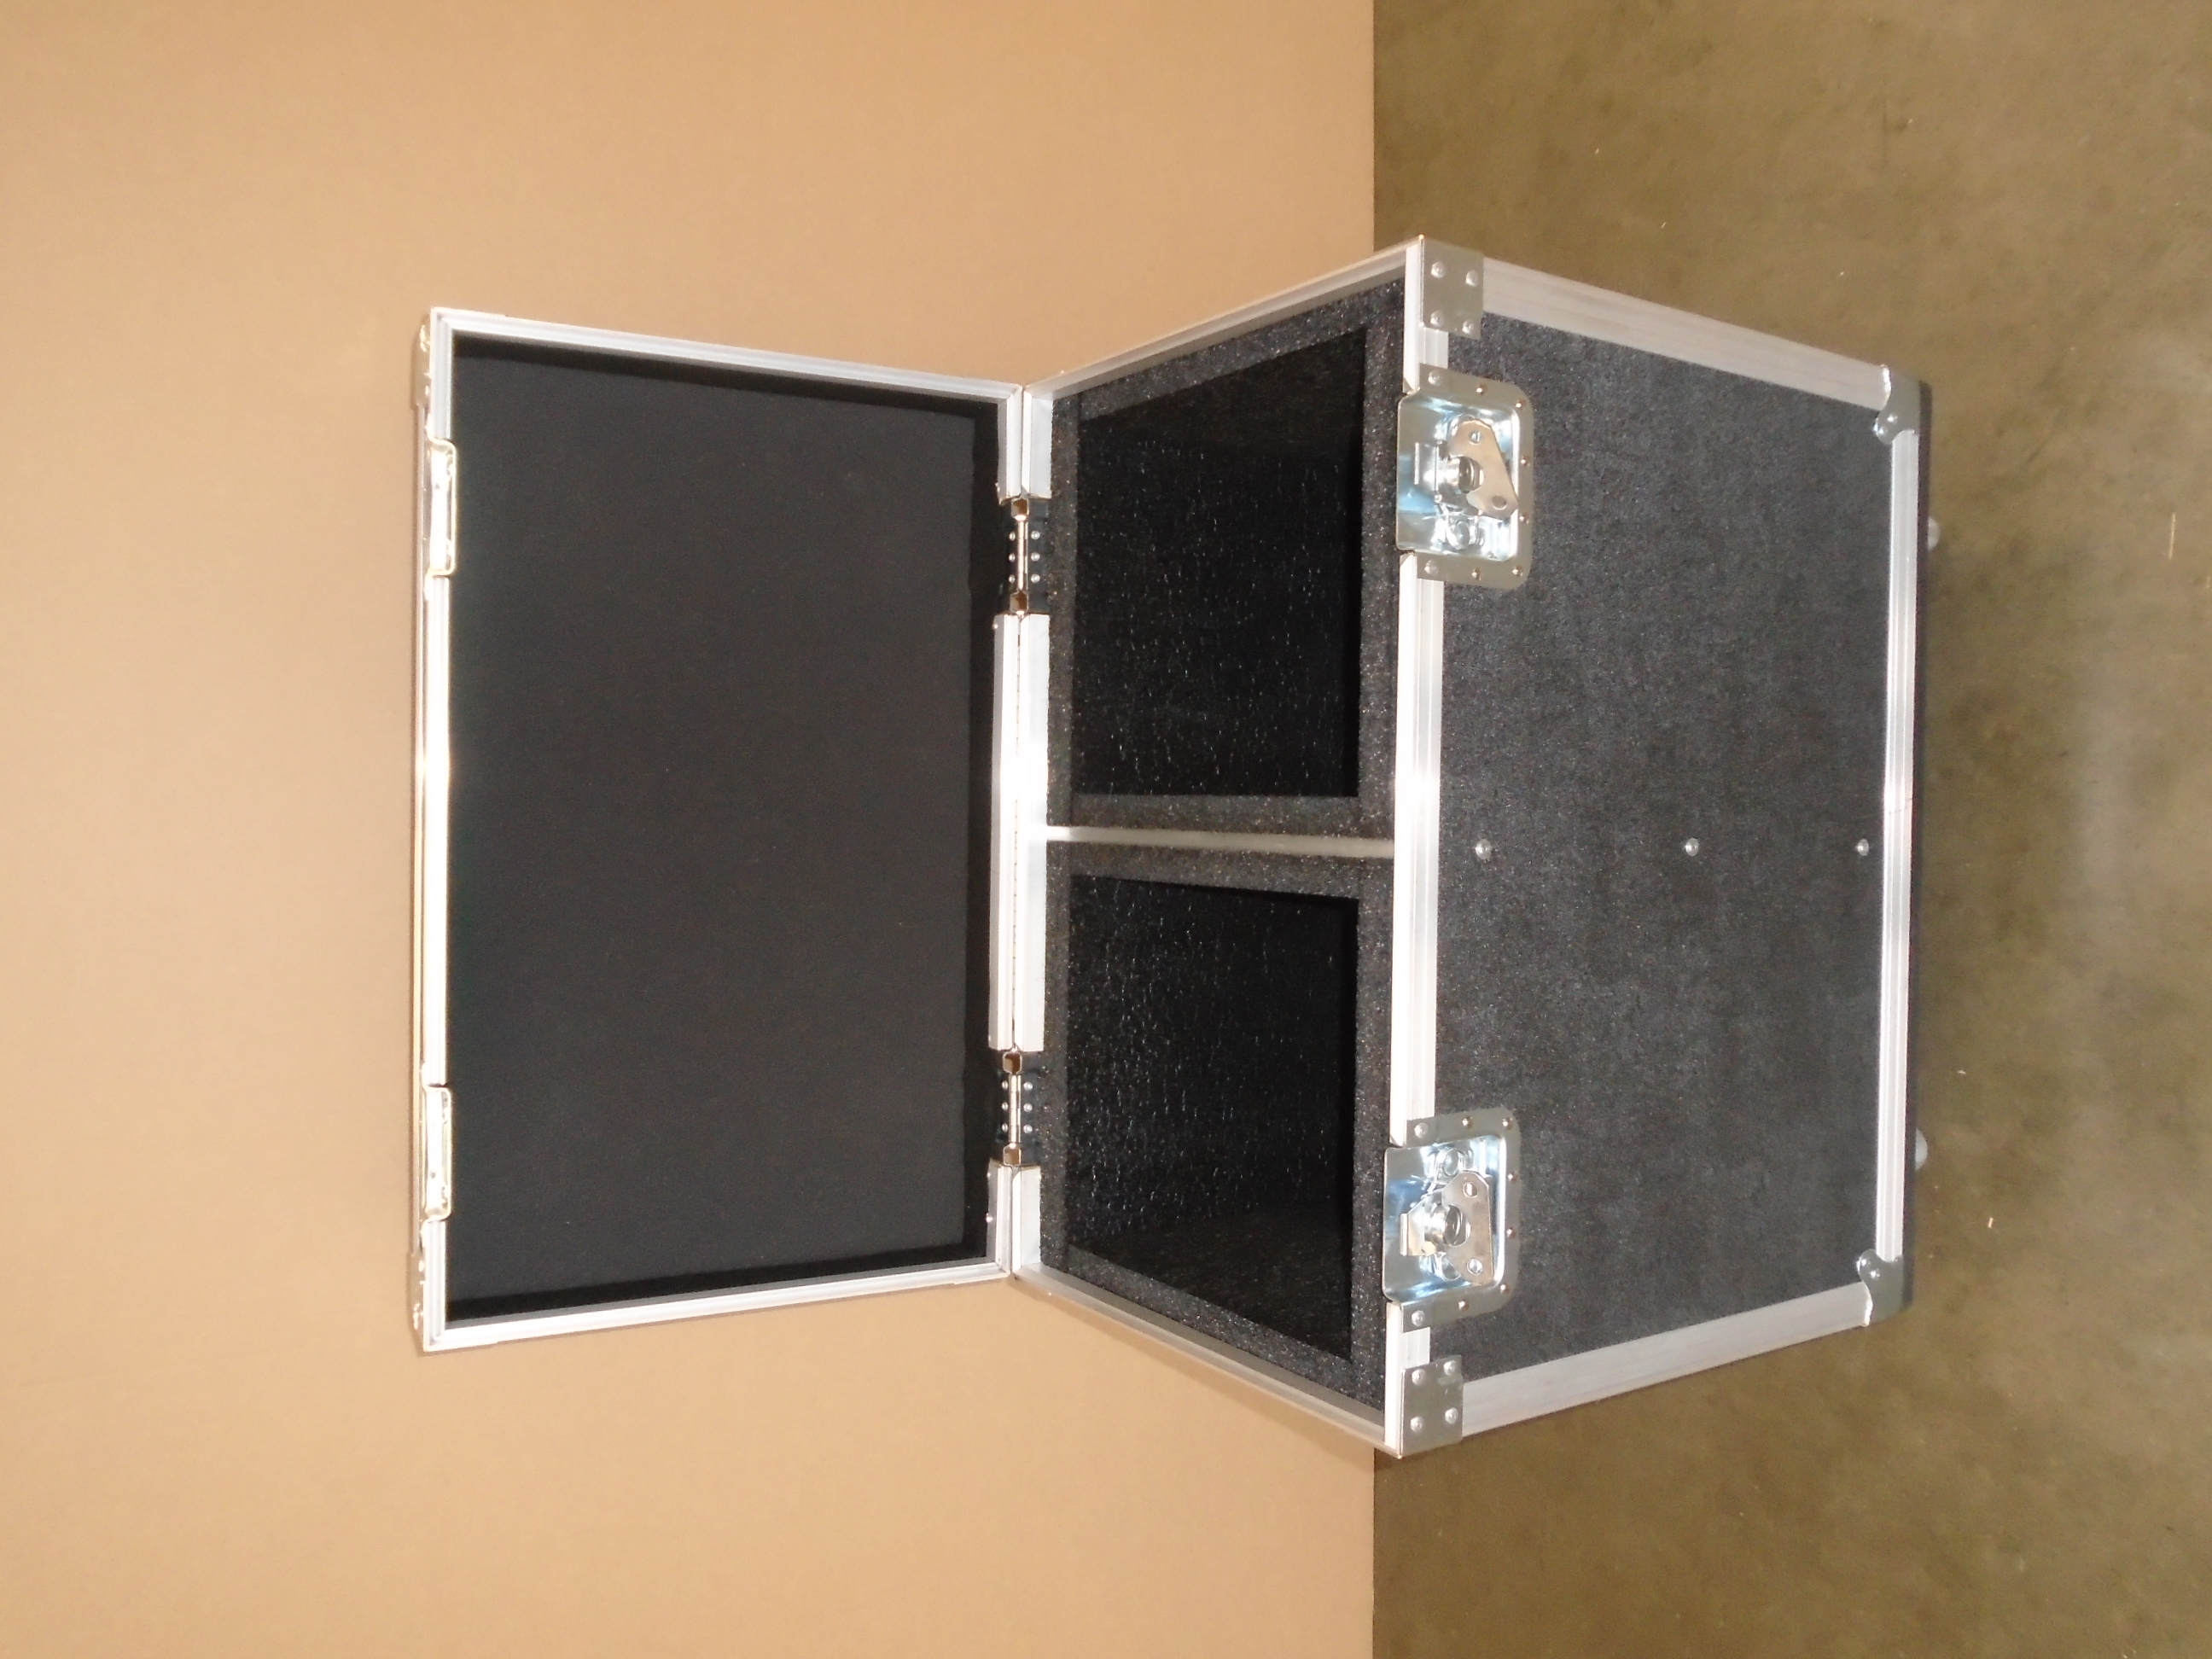 Print # 8067 - Custom Road Case for 2-Pack Turbosound IQ8 2-Way Powered Speaker Kit with Hanging Yoke
Bracket By Nelson Case Corp